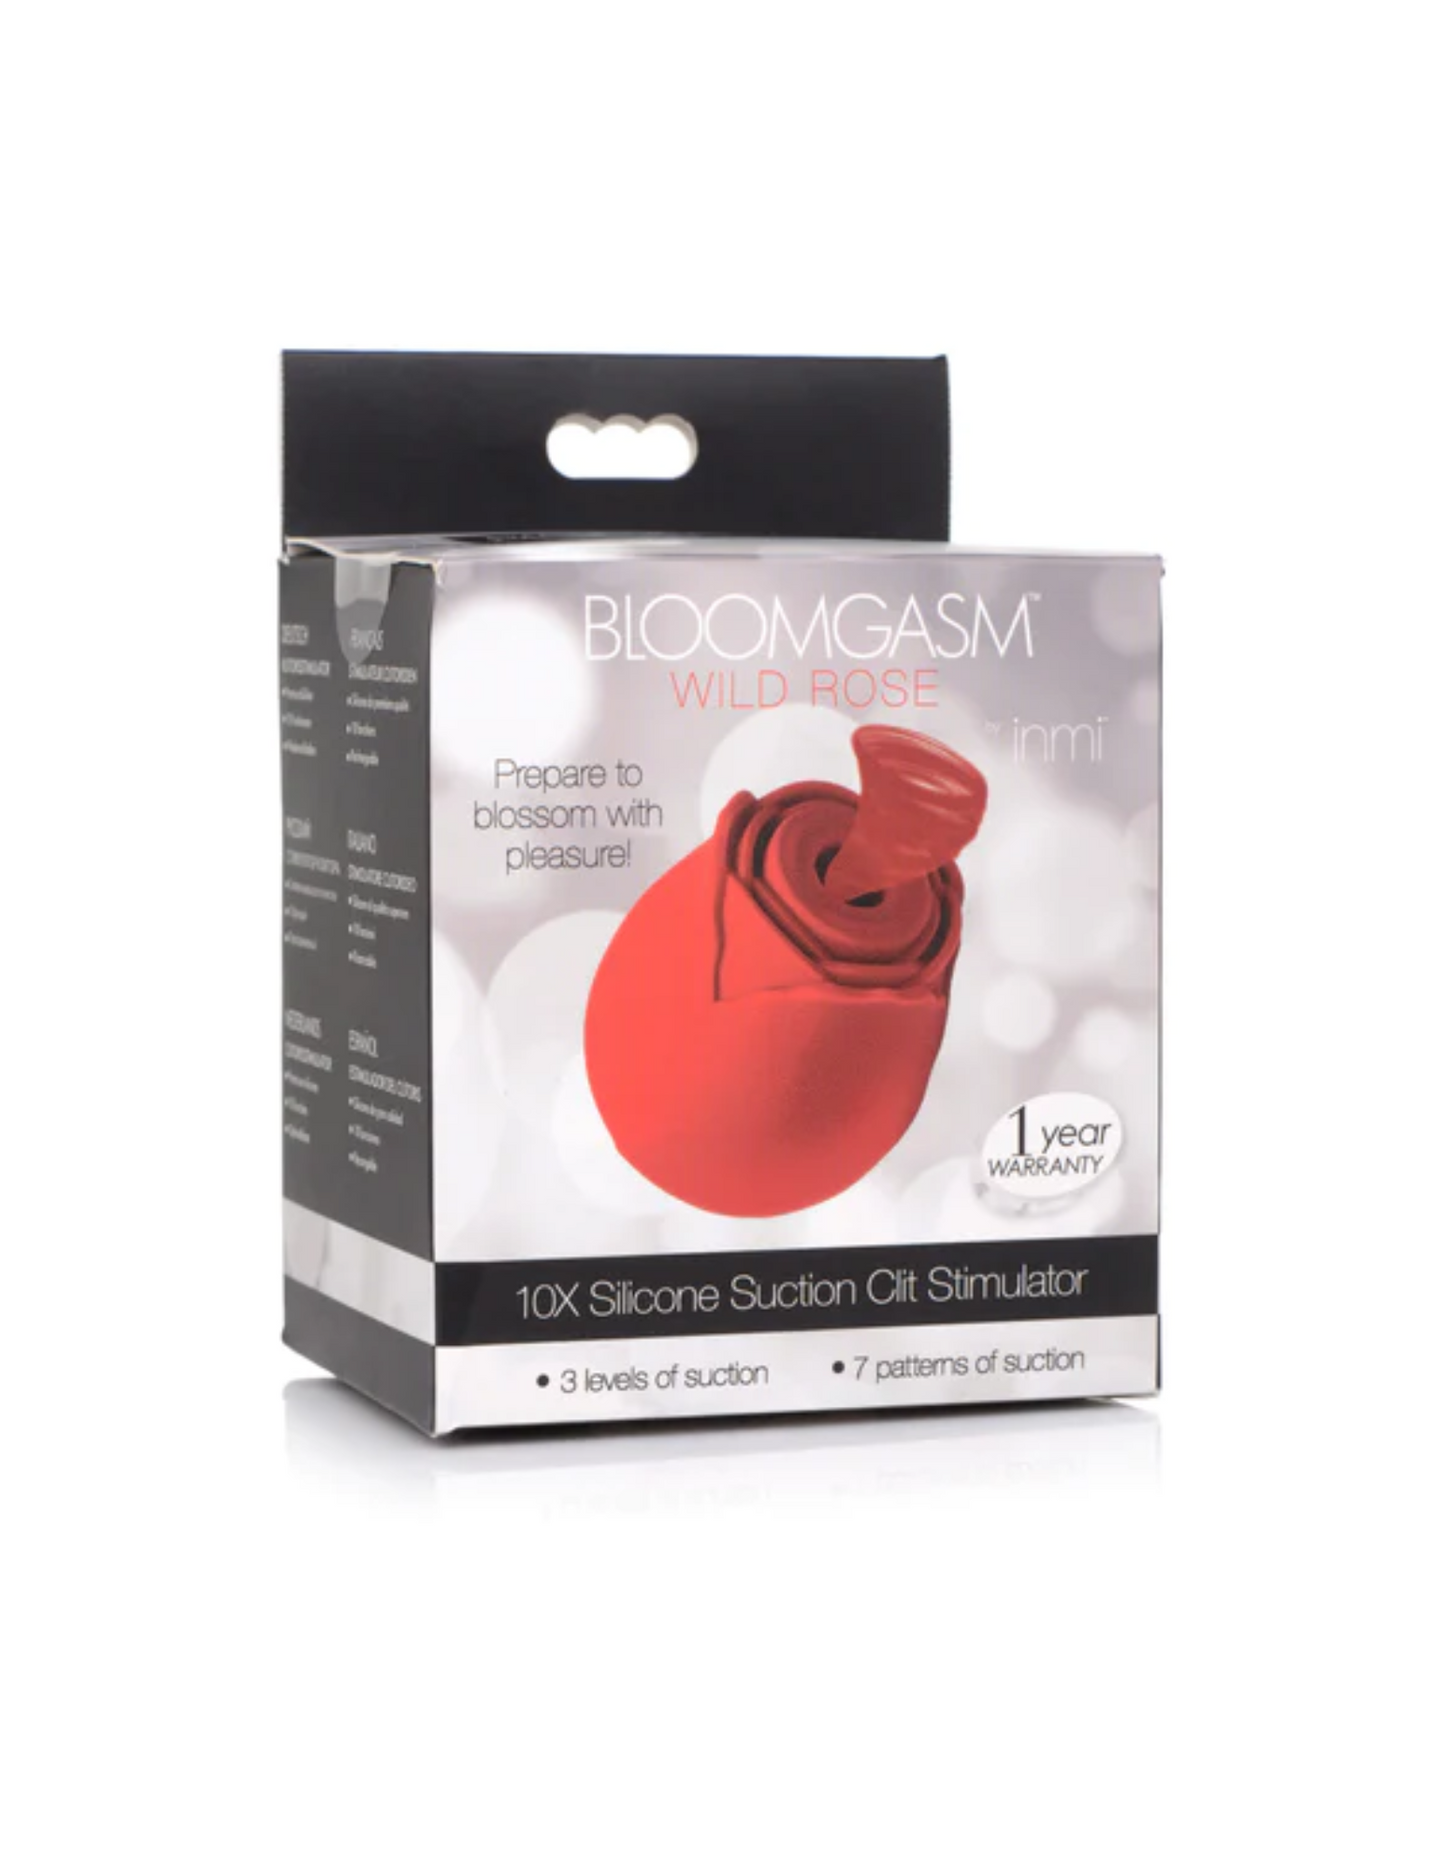 Bloomgasm Wild Rose 10X Silicone Suction Clit Stimulator (red) in package.